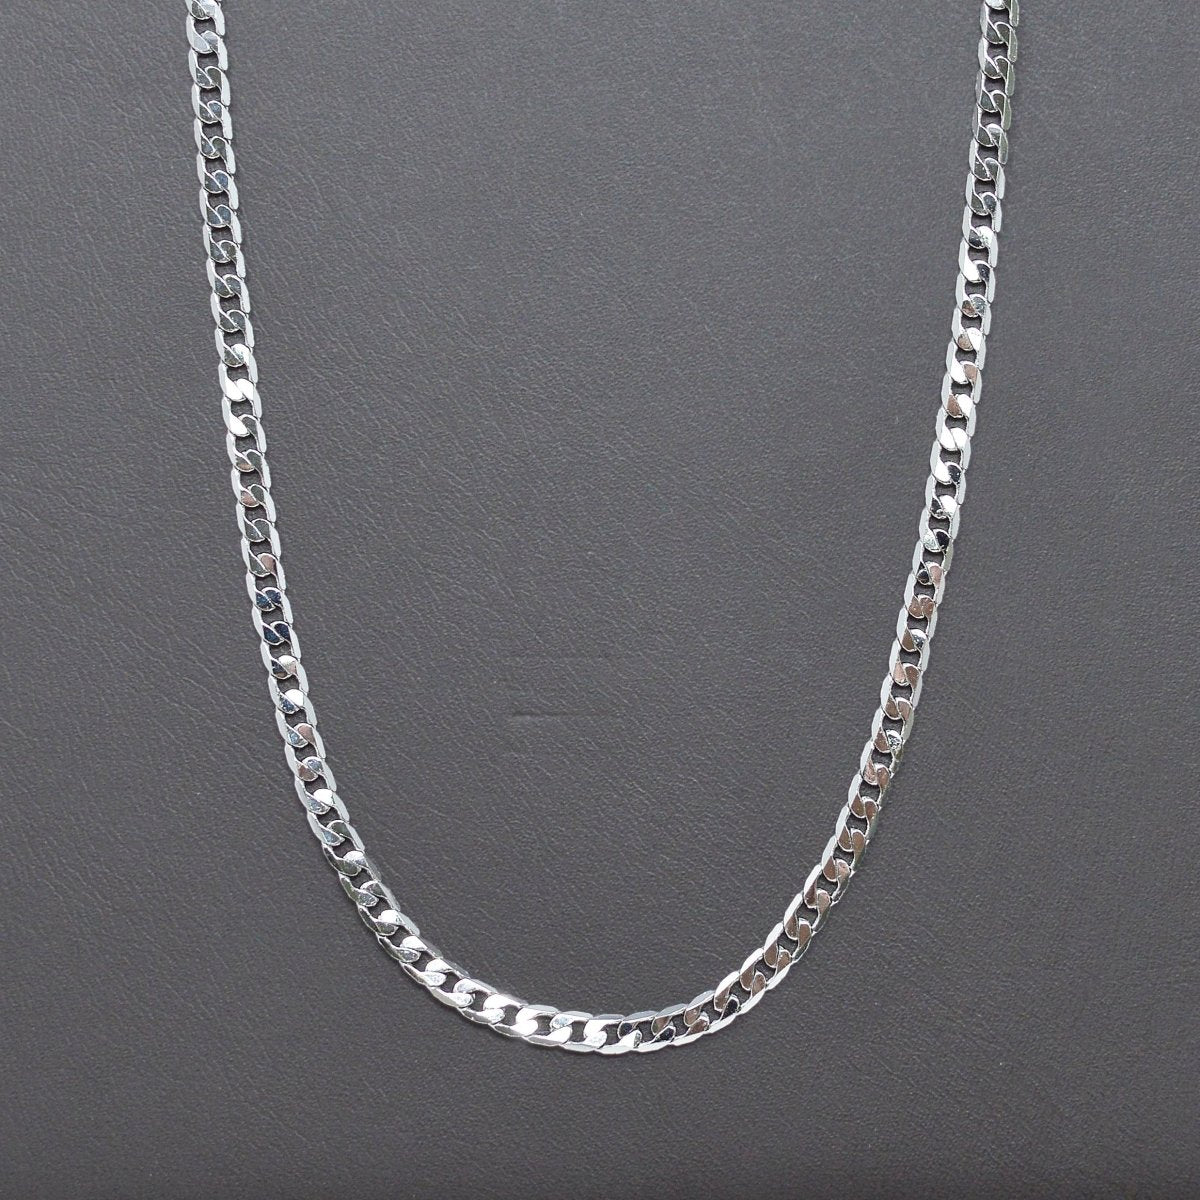 Silver Curb Flat Oval Smooth White gold Filled Chain 17.7" inch 3mm Tarnish Resistant Finished Chain for Jewelry Making and Craft Supplies | CN-1010 Clearance Pricing - DLUXCA